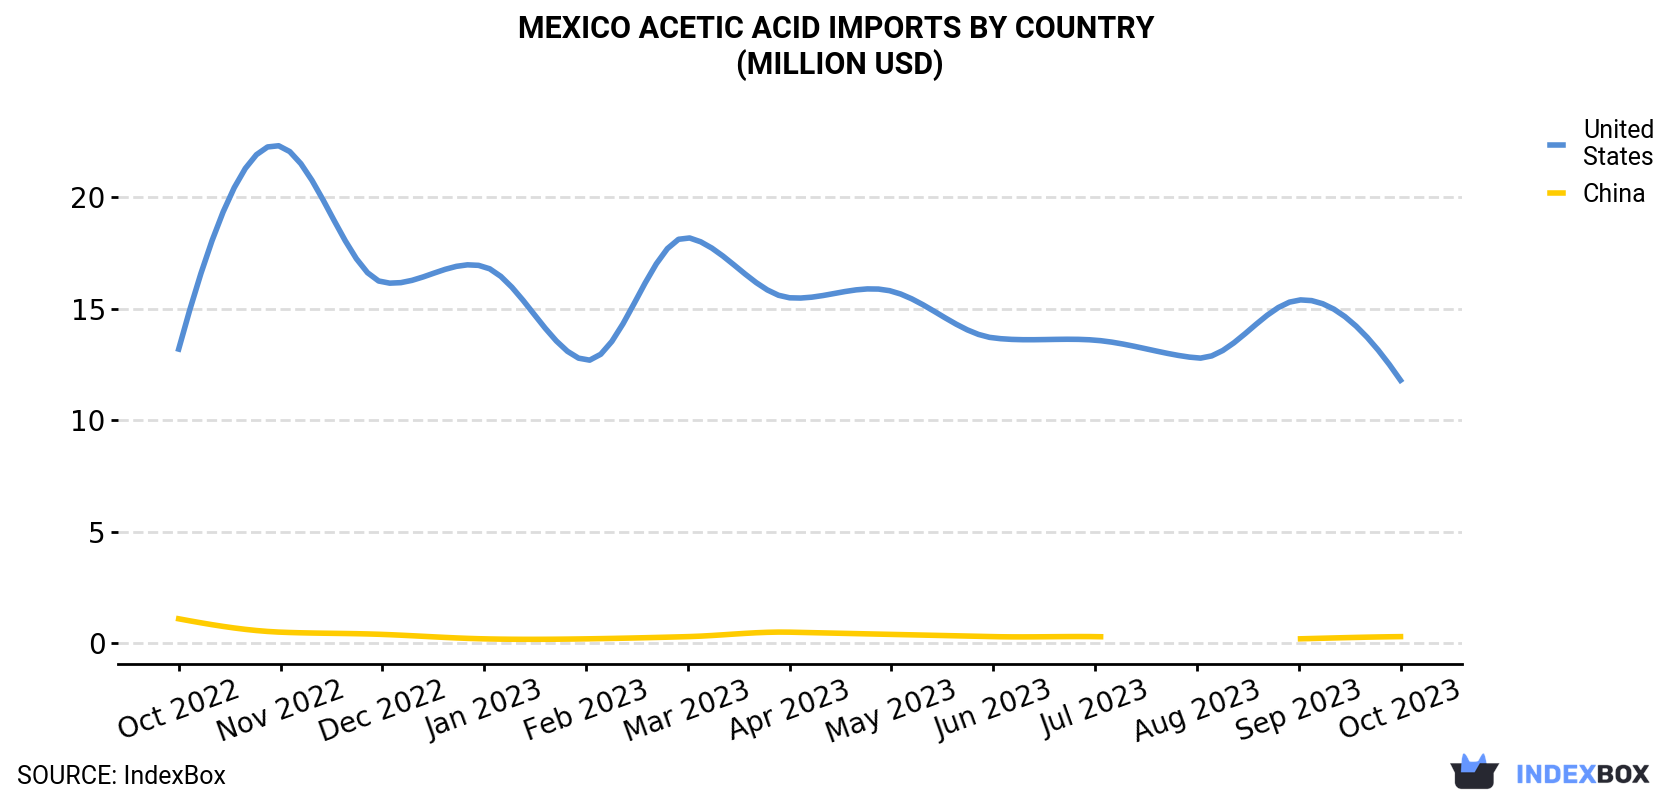 Mexico Acetic Acid Imports By Country (Million USD)